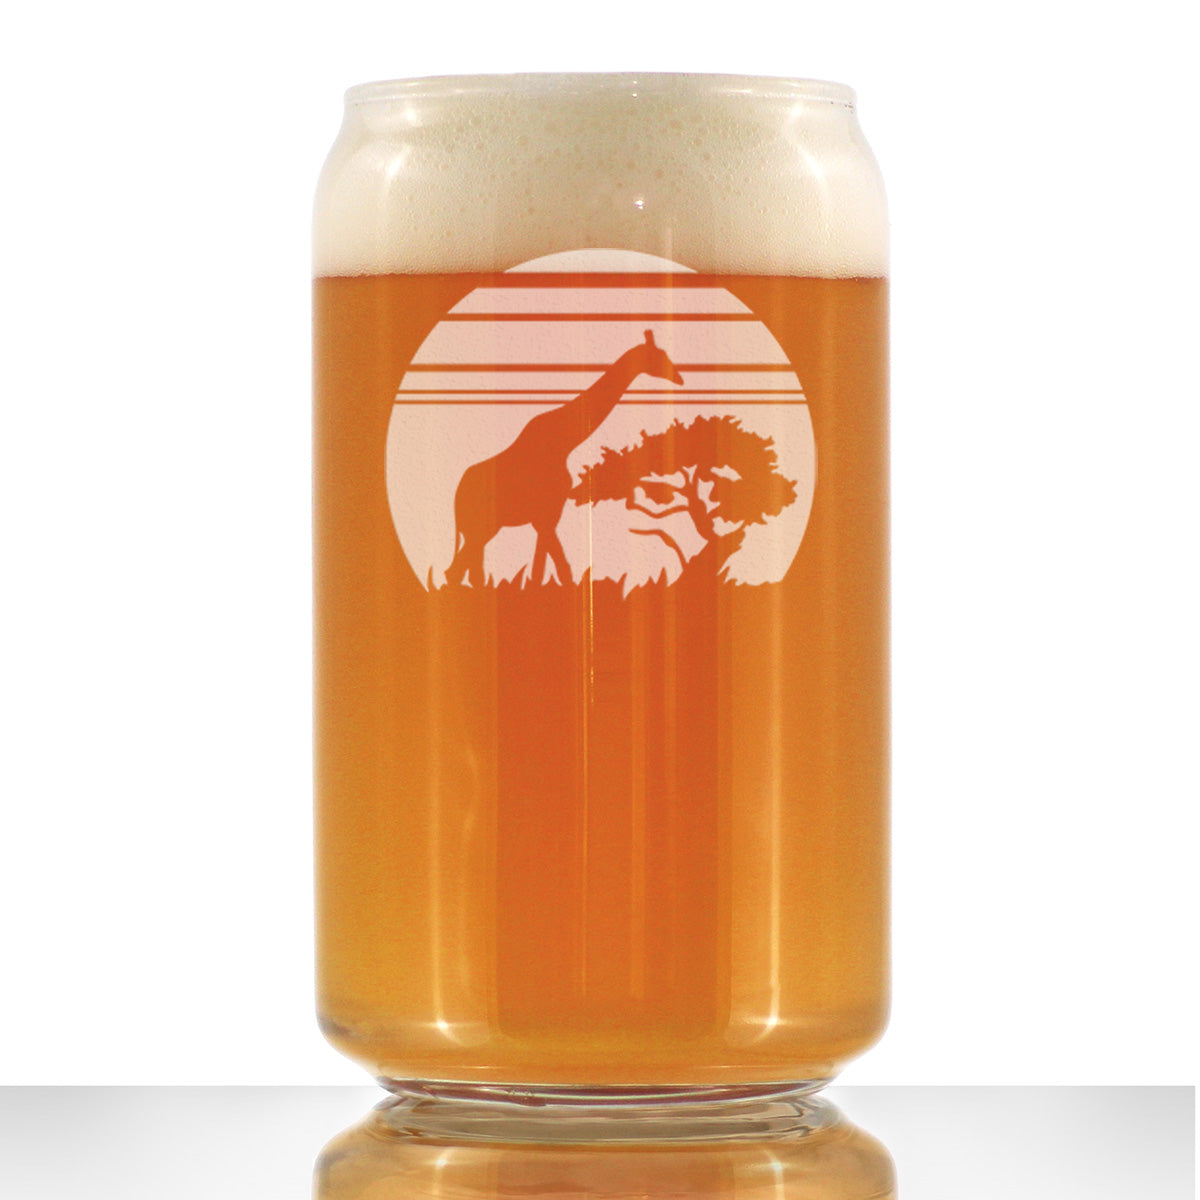 Giraffe Sunset Beer Can Pint Glass - Fun Safari Themed Decor and Gifts for Lovers of African Wild Animals - 16 Oz Glasses